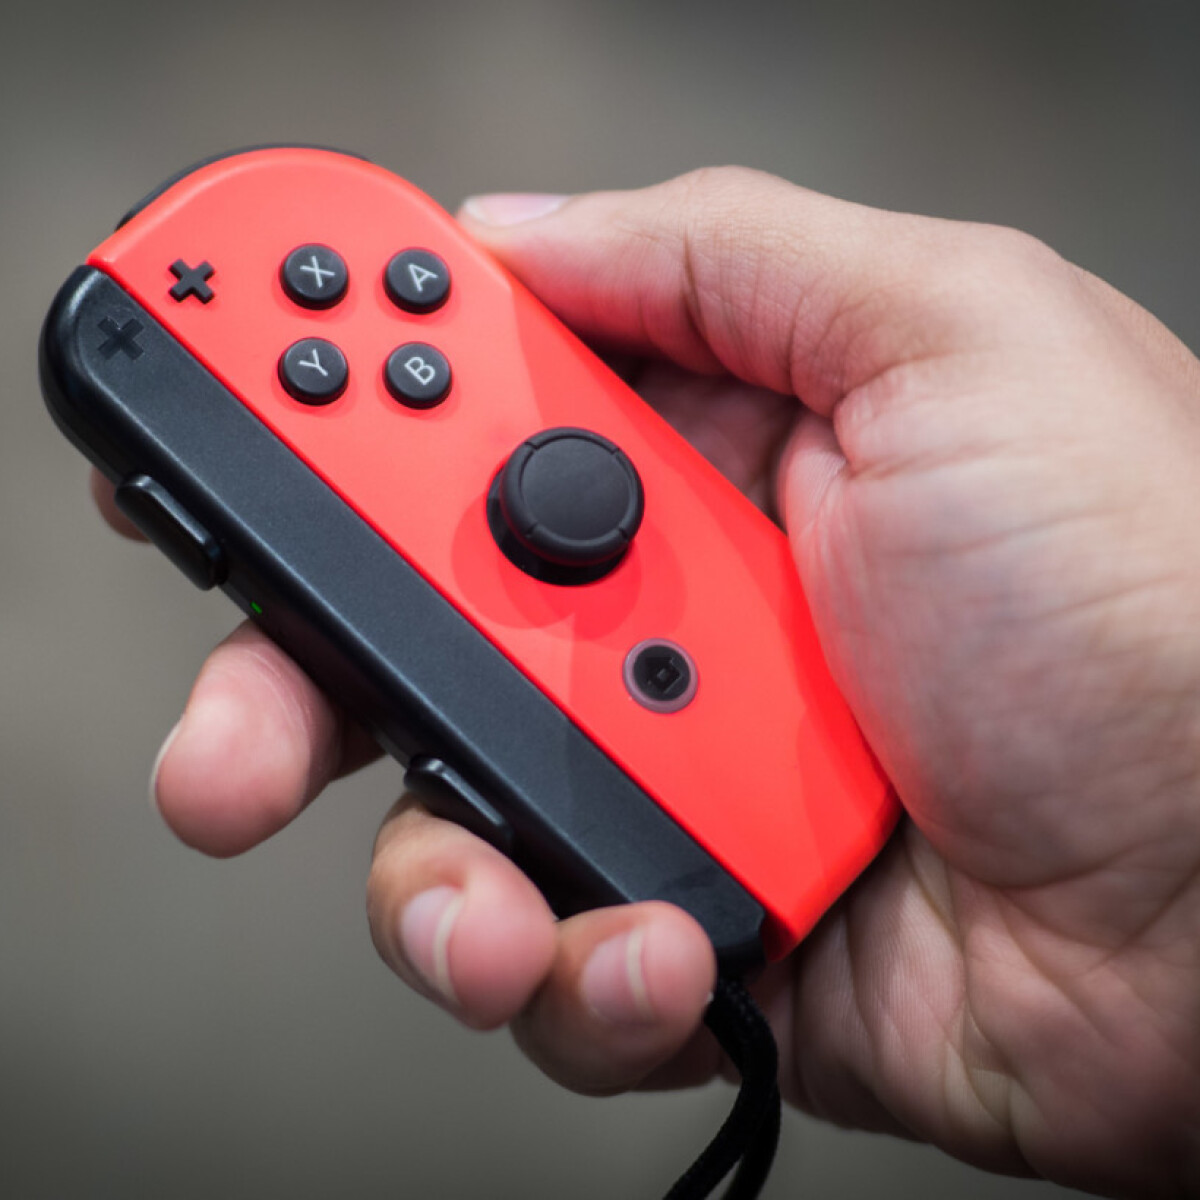 Here's how to find a lost Joy Con with the Nintendo Switch